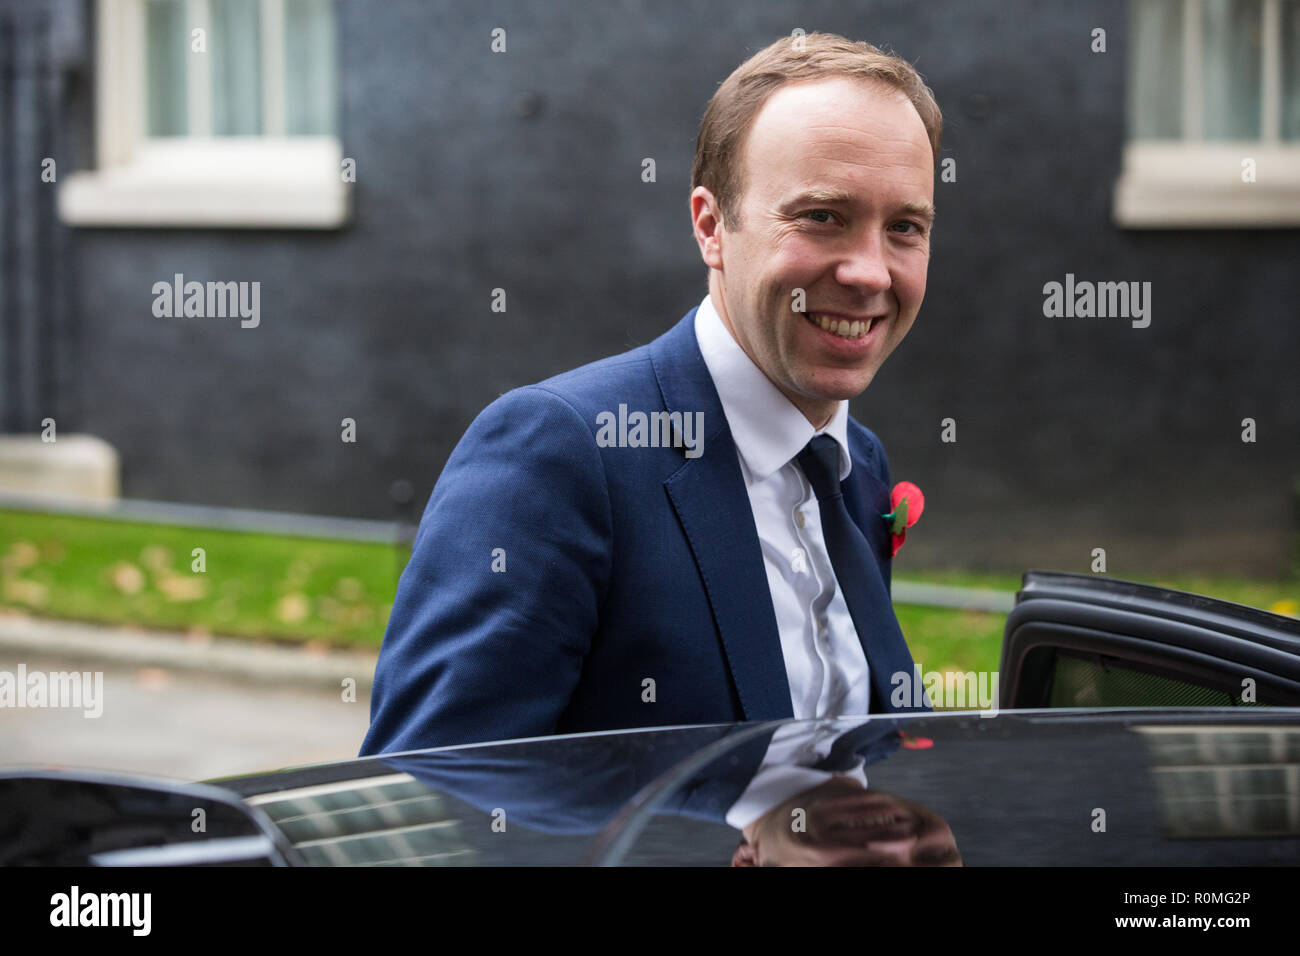 London, UK. 6th November, 2018. Matt Hancock MP, Secretary of State for Health and Social Care, leaves 10 Downing Street following a Cabinet meeting during which the Prime Minister was expected to update ministers on the current status of Brexit negotiations with a view to working towards a special Brexit summit in the final week of November. Credit: Mark Kerrison/Alamy Live News Stock Photo